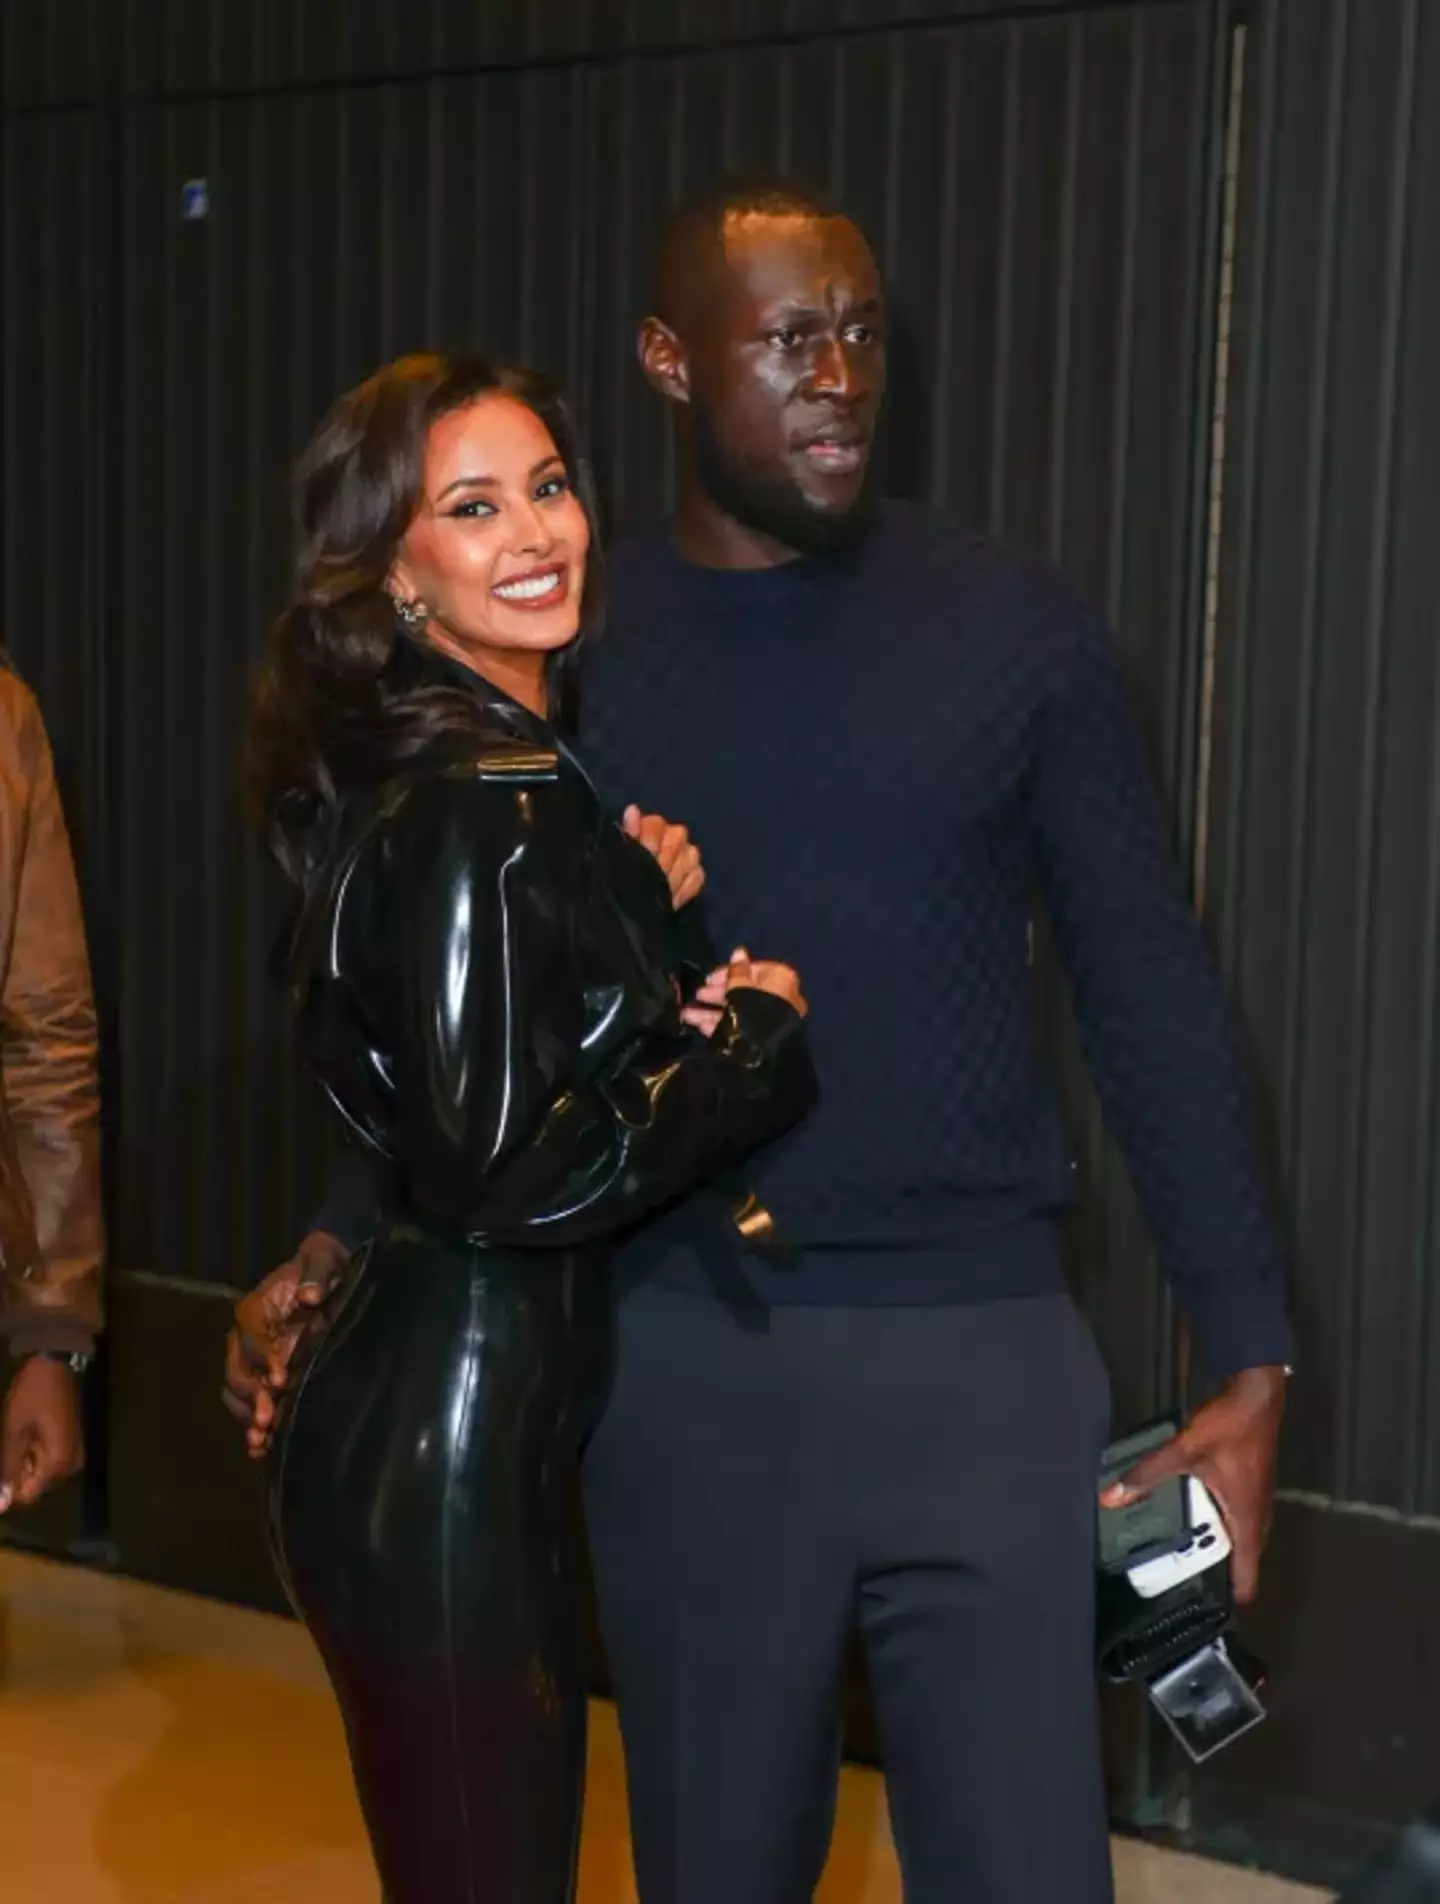 The Love Island host couldn't stop smiling with Stormzy on her arm.